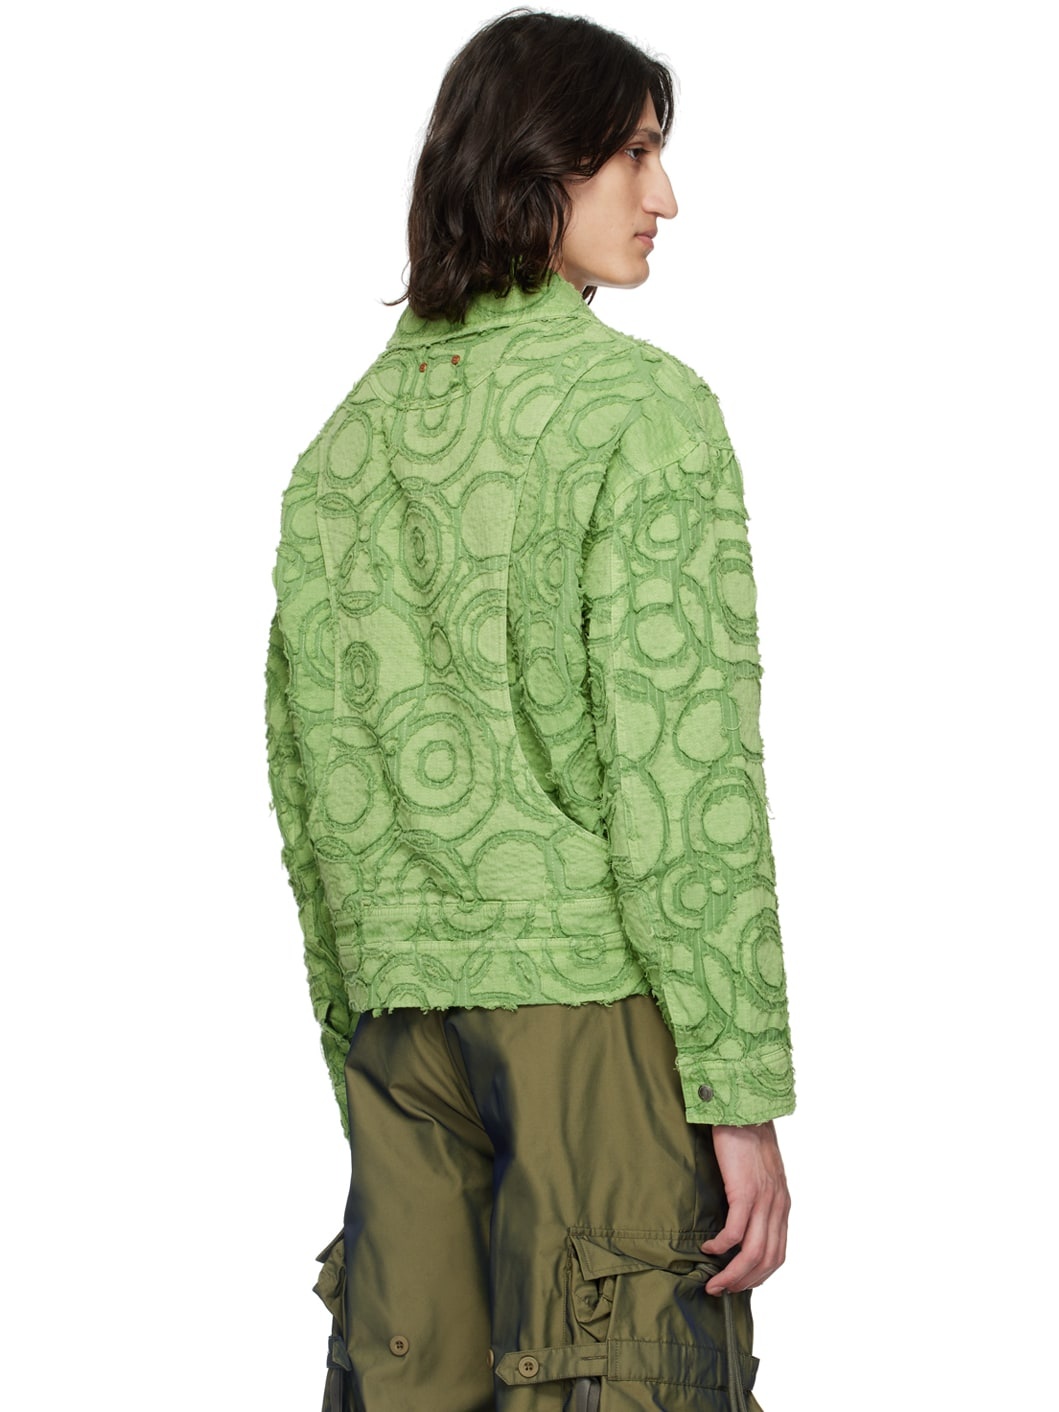 Green Burn Out Jacket - 3